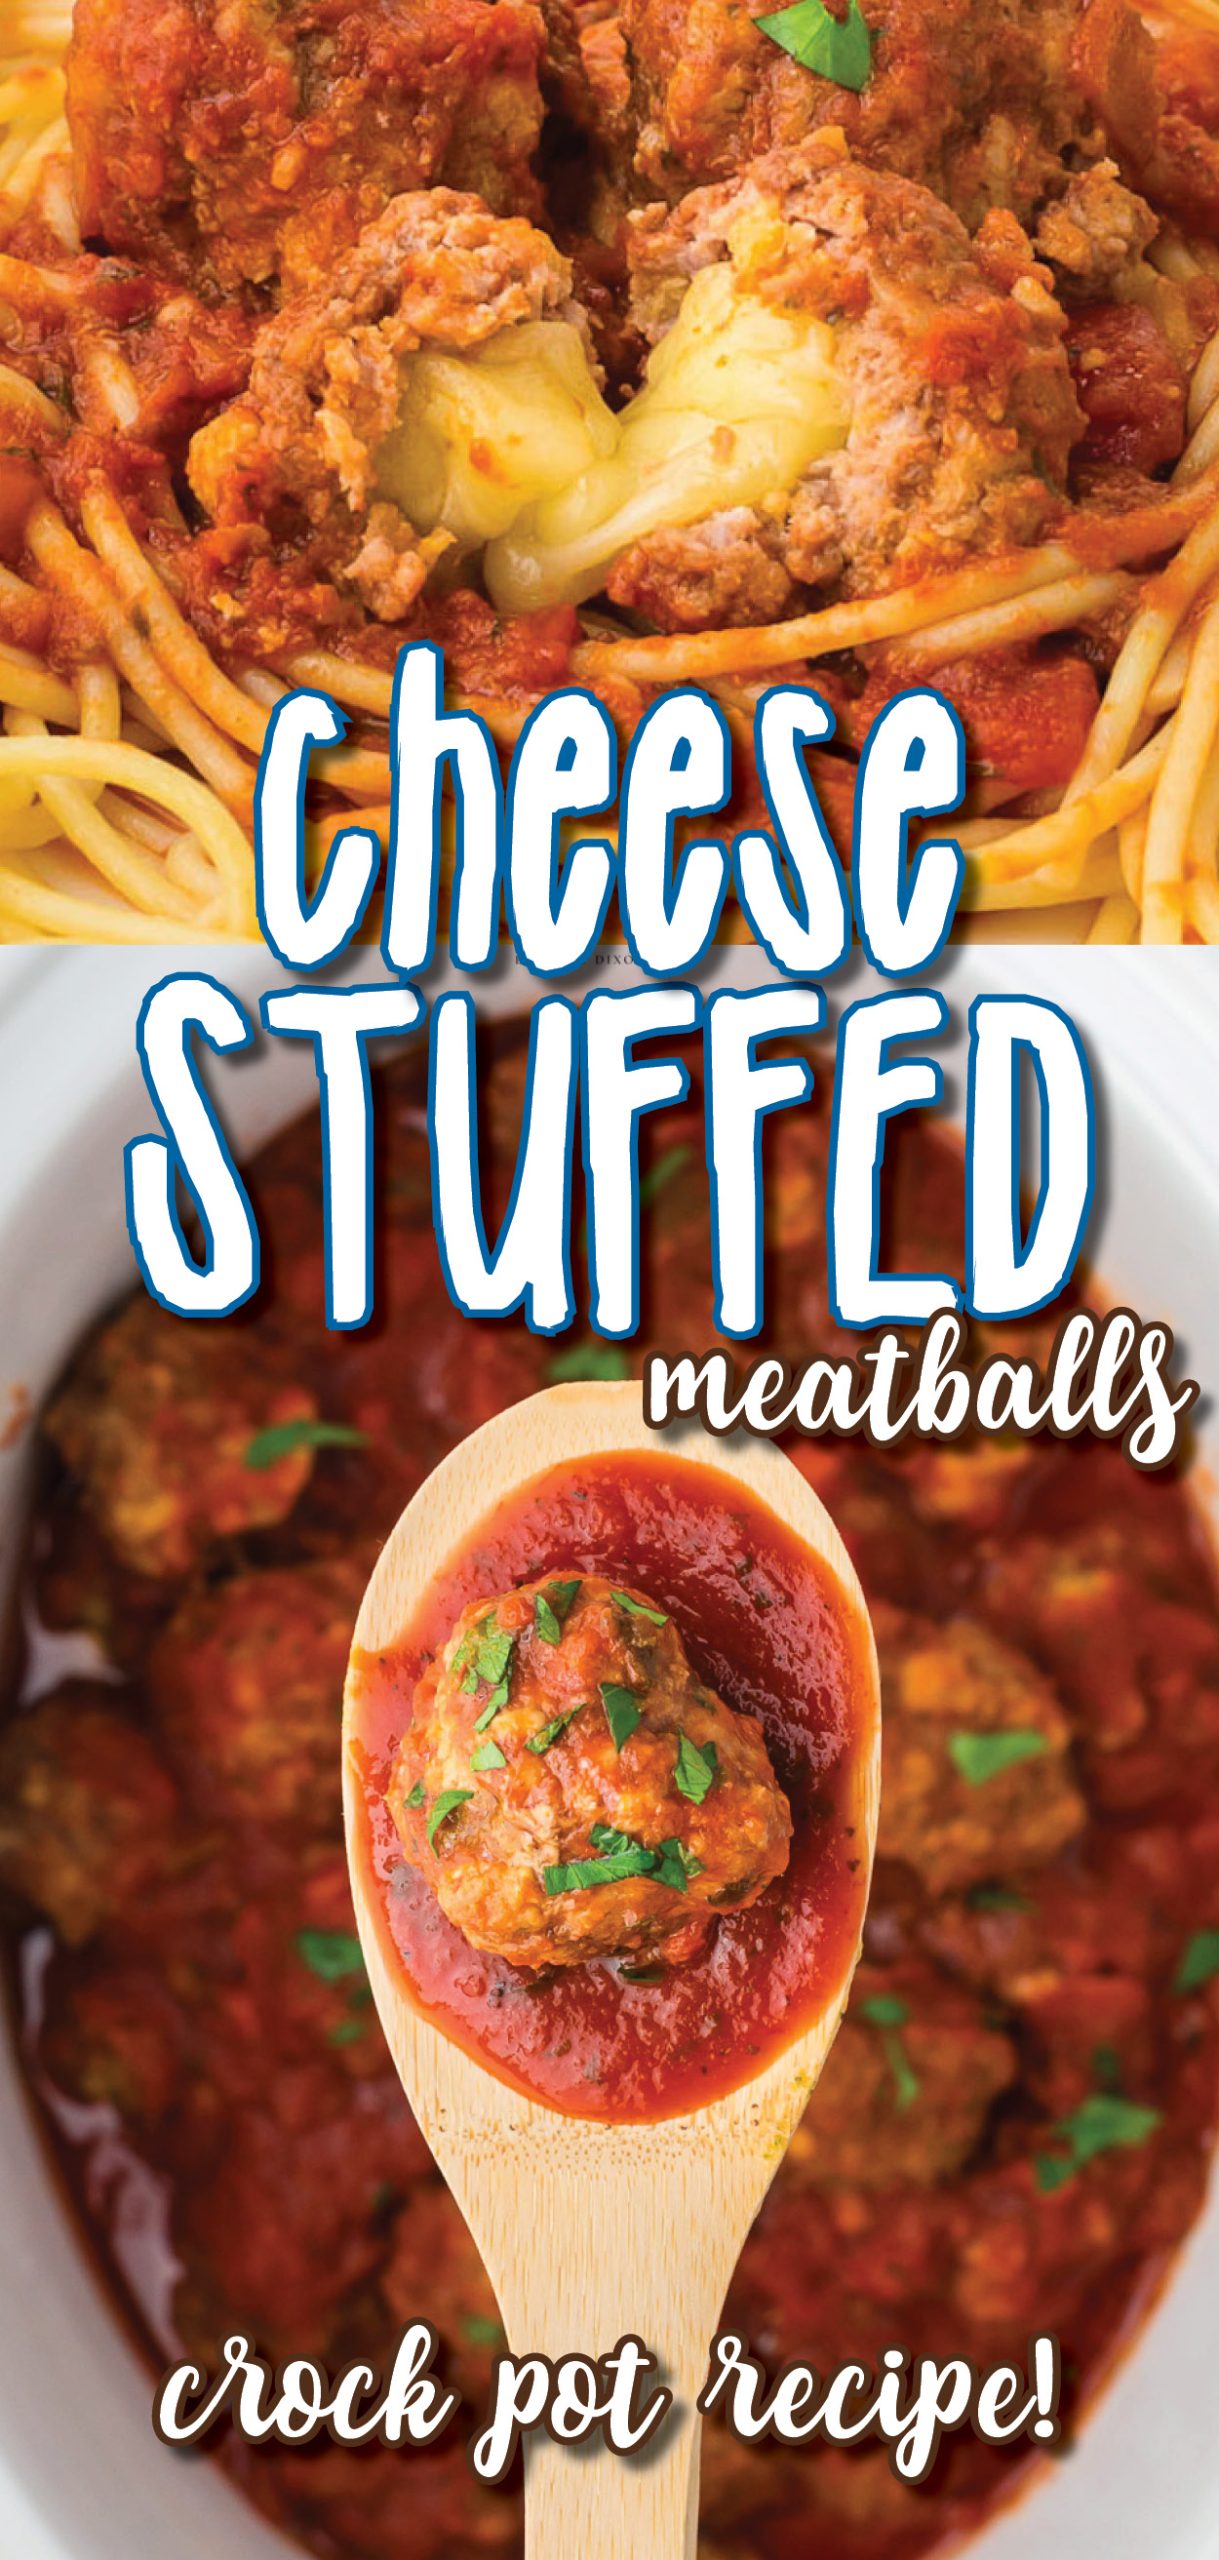 Tender juicy slow cooker Cheese Stuffed Meatballs simmered in the most delicious sauce that everyone goes crazy for! Perfect appetizer or a delicious, easy meal with pasta, rice, or for meatball subs!